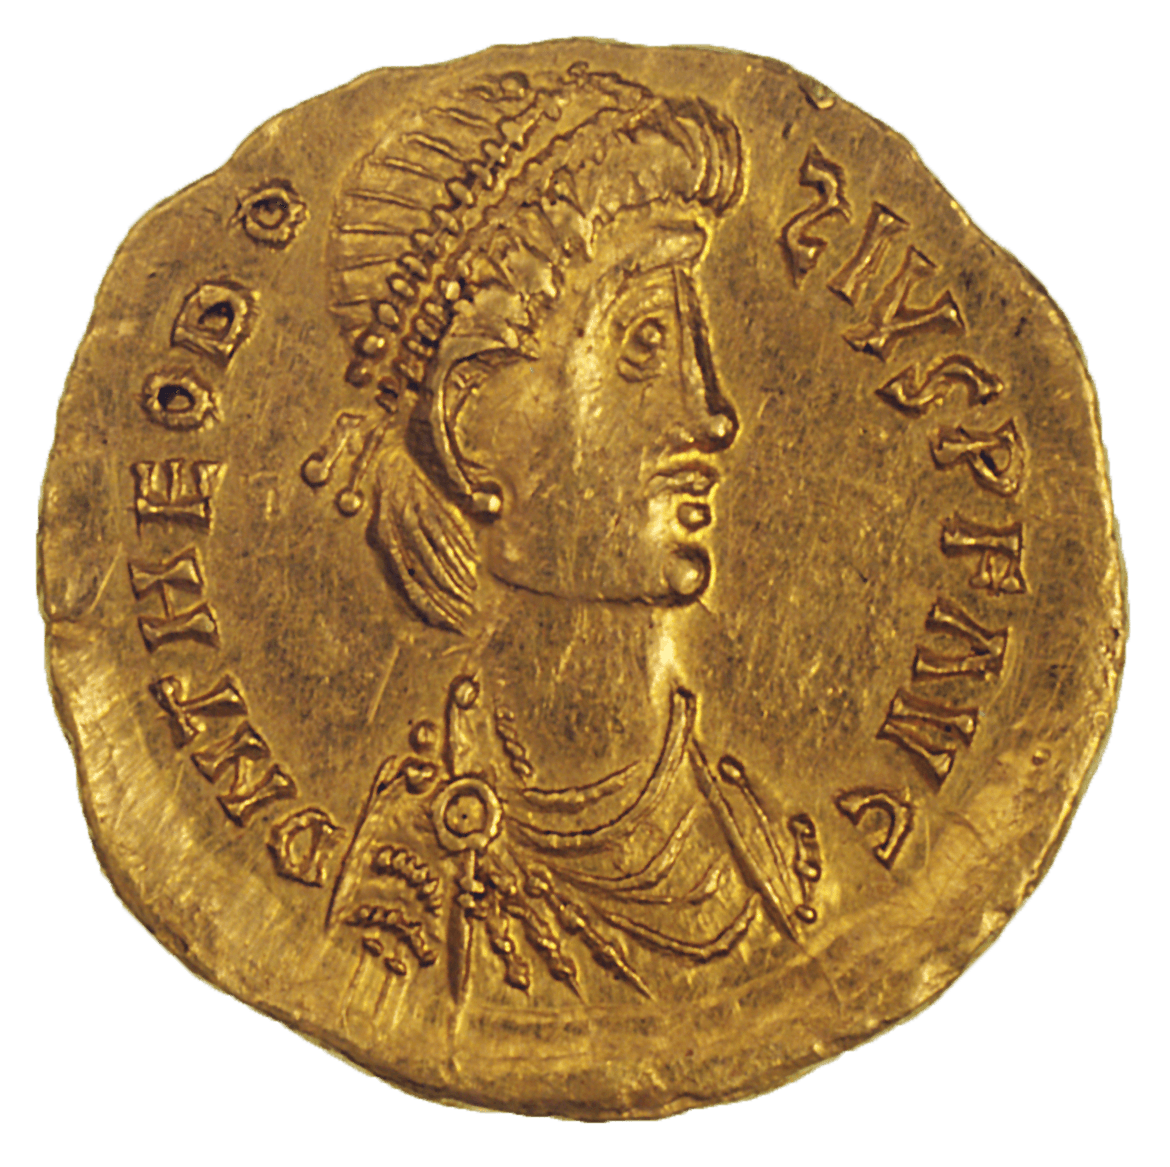 Bavaria or Baden-Württemberg or from the Region around Lake Balaton, Undefined Issue in the Name of Theodosius II, Tremissis (obverse)